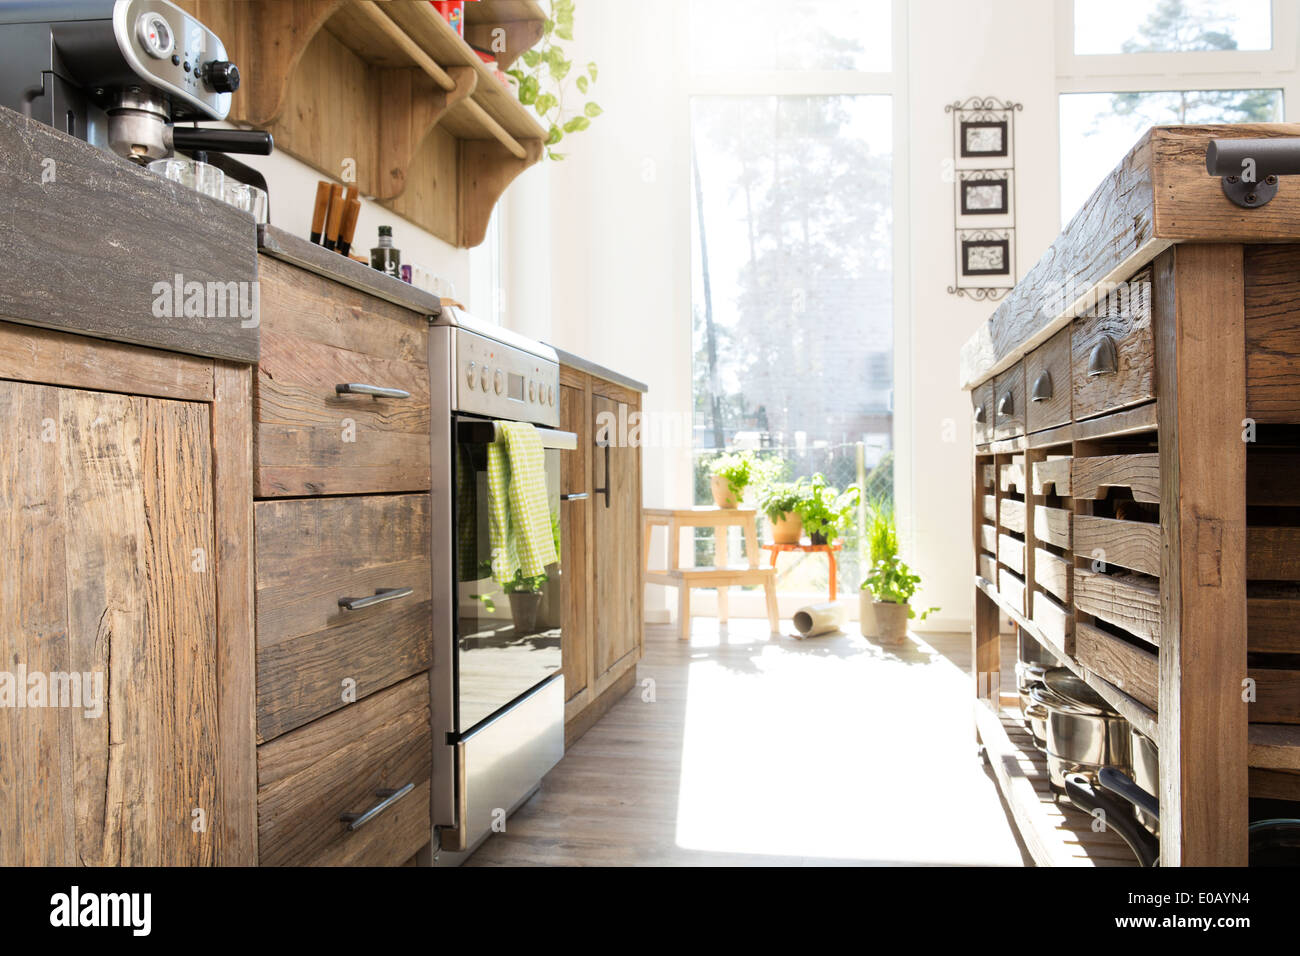 Country style kitchen in sunlight Stock Photo